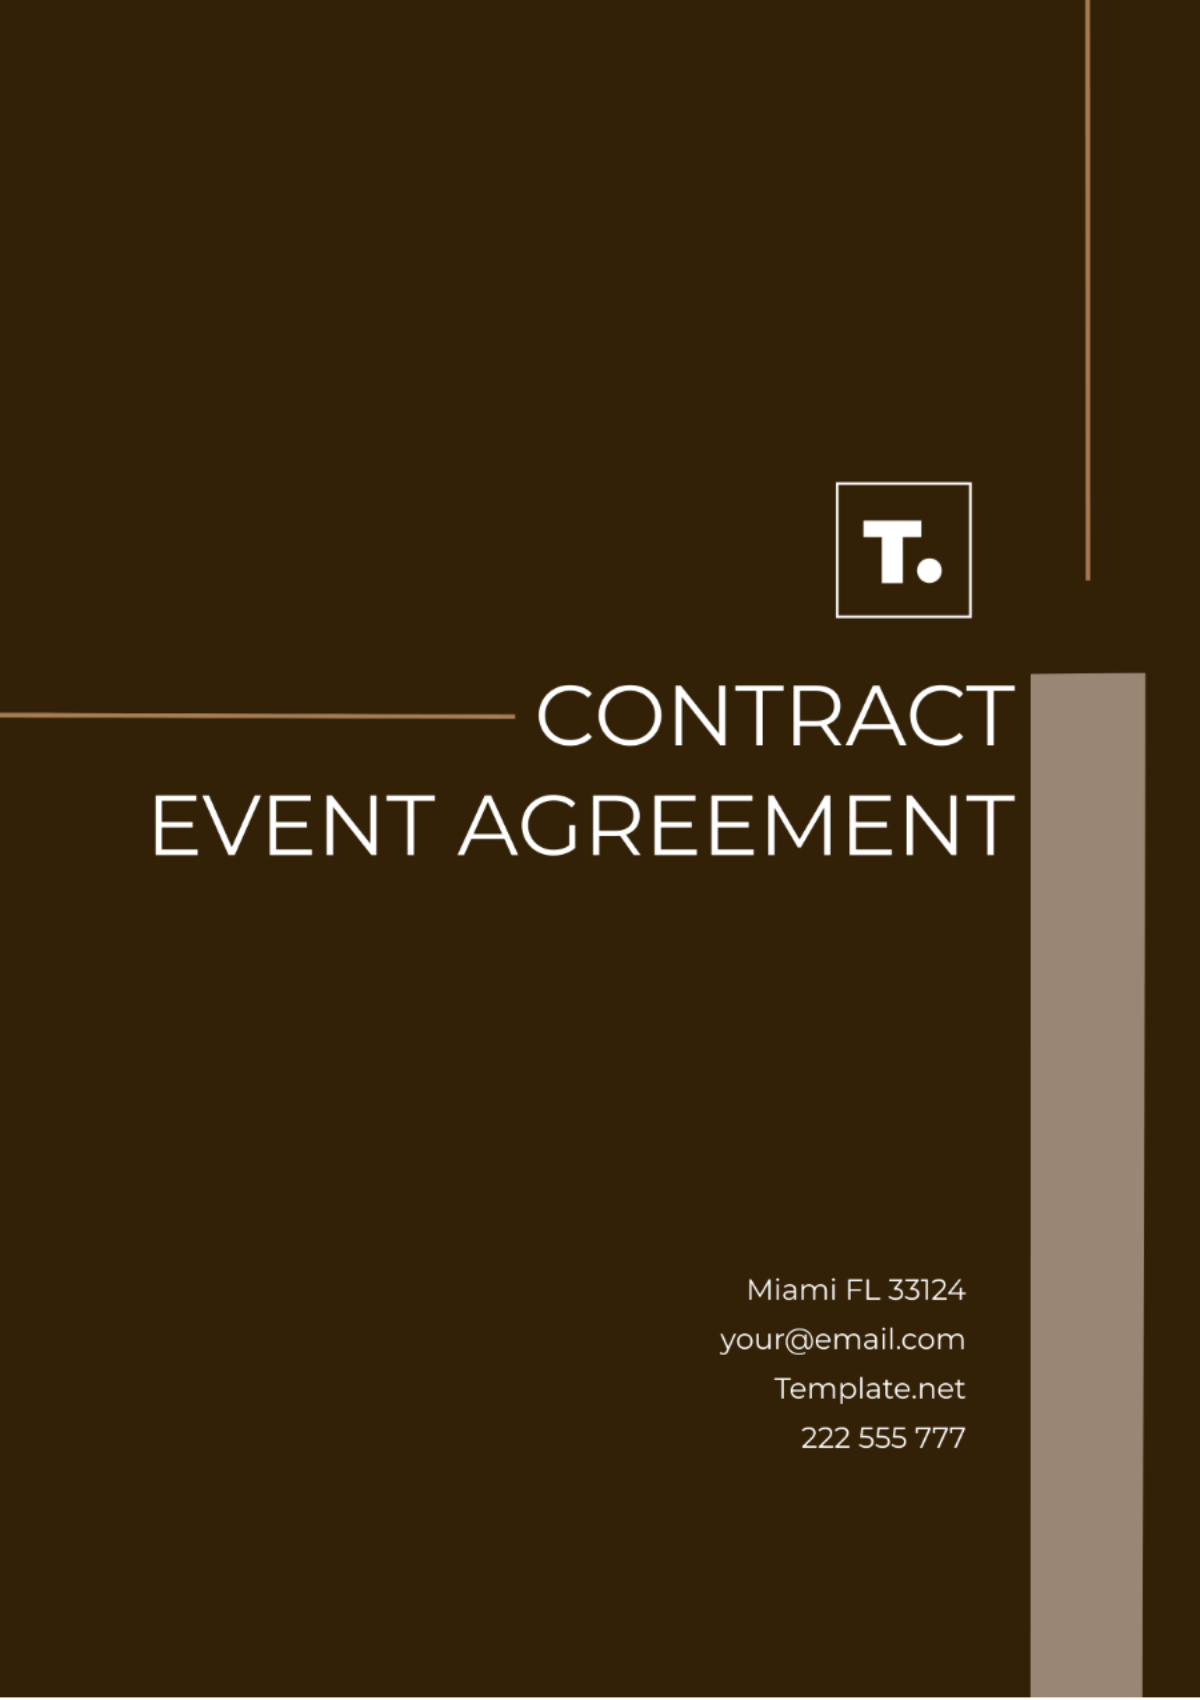 Event Agreement Contract Template